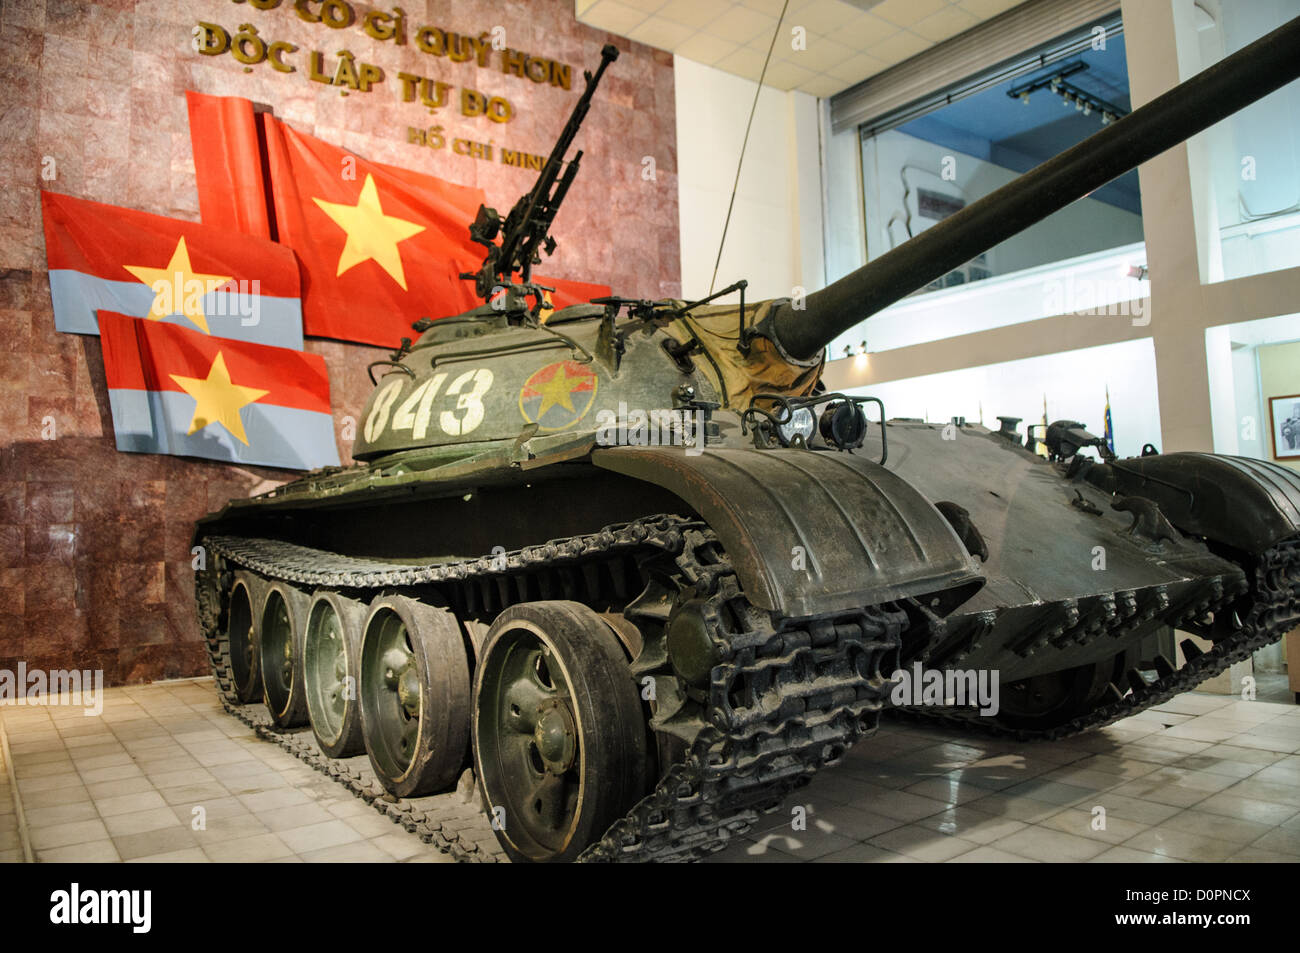 HANOI, Vietnam - HANOI, Vietnam - A captured tank on display at the Vietnam Military History Museum. The museum was opened on July 17, 1956, two years after the victory over the French at Dien Bien Phu. It is also known as the Army Museum (the Vietnamese had little in the way of naval or air forces at the time) and is located in central Hanoi in the Ba Dinh District near the Lenin Monument in Lenin Park and not far from the Ho Chi Minh Mausoleum. Stock Photo